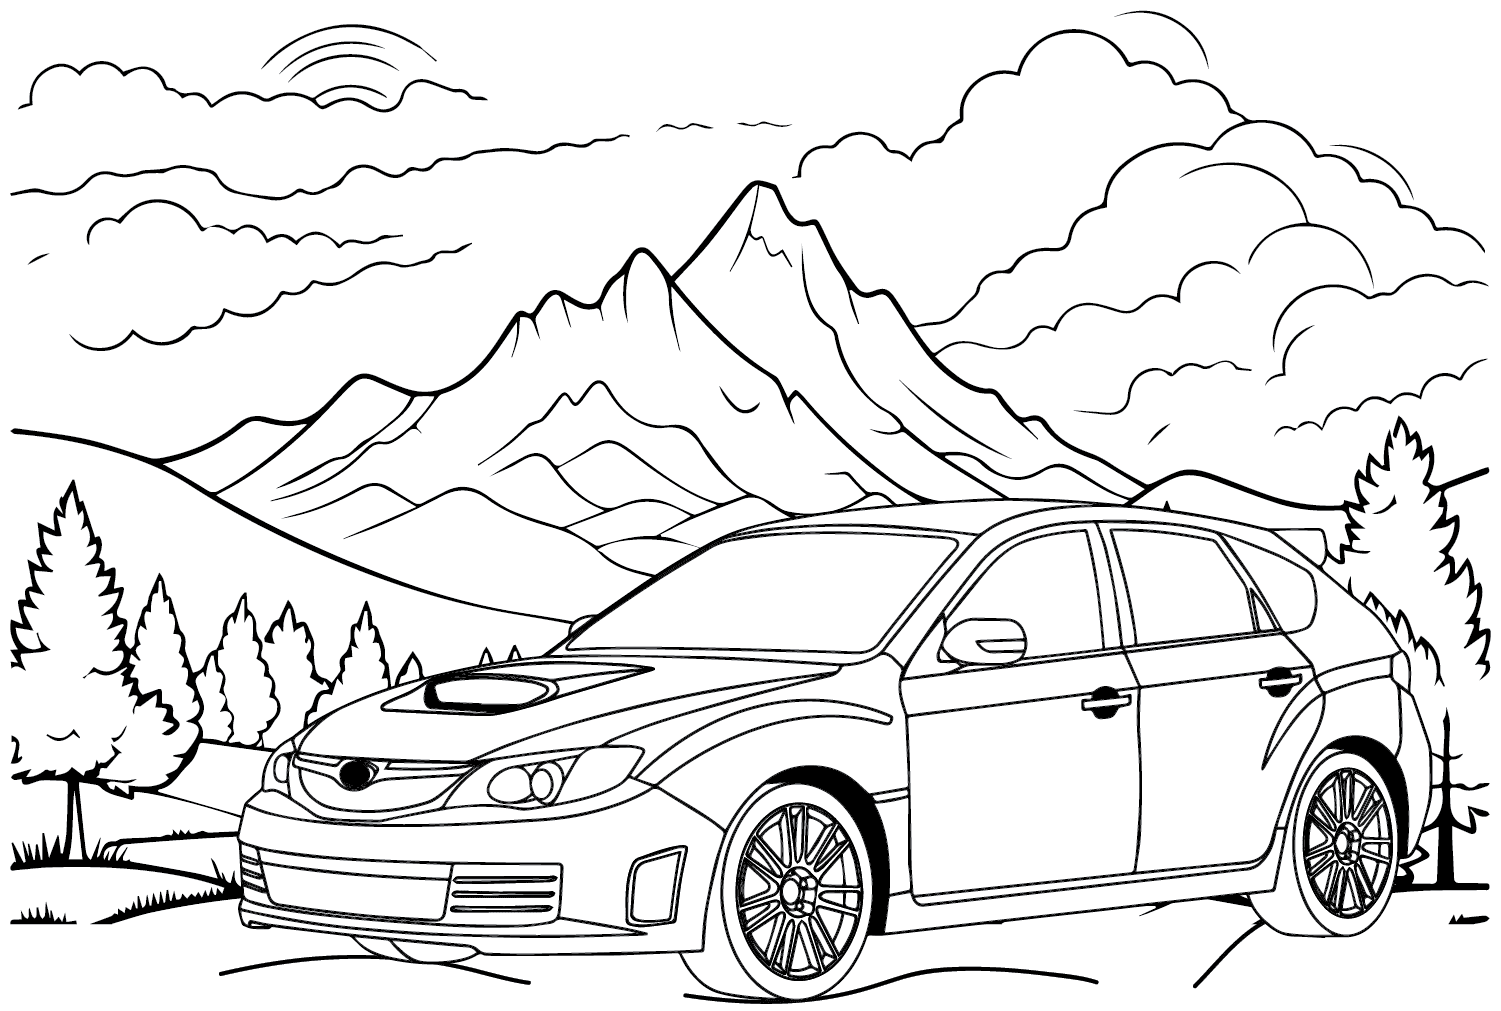 Subaru Coloring Pages to for Kids - Subaru Coloring Pages - Coloring ...